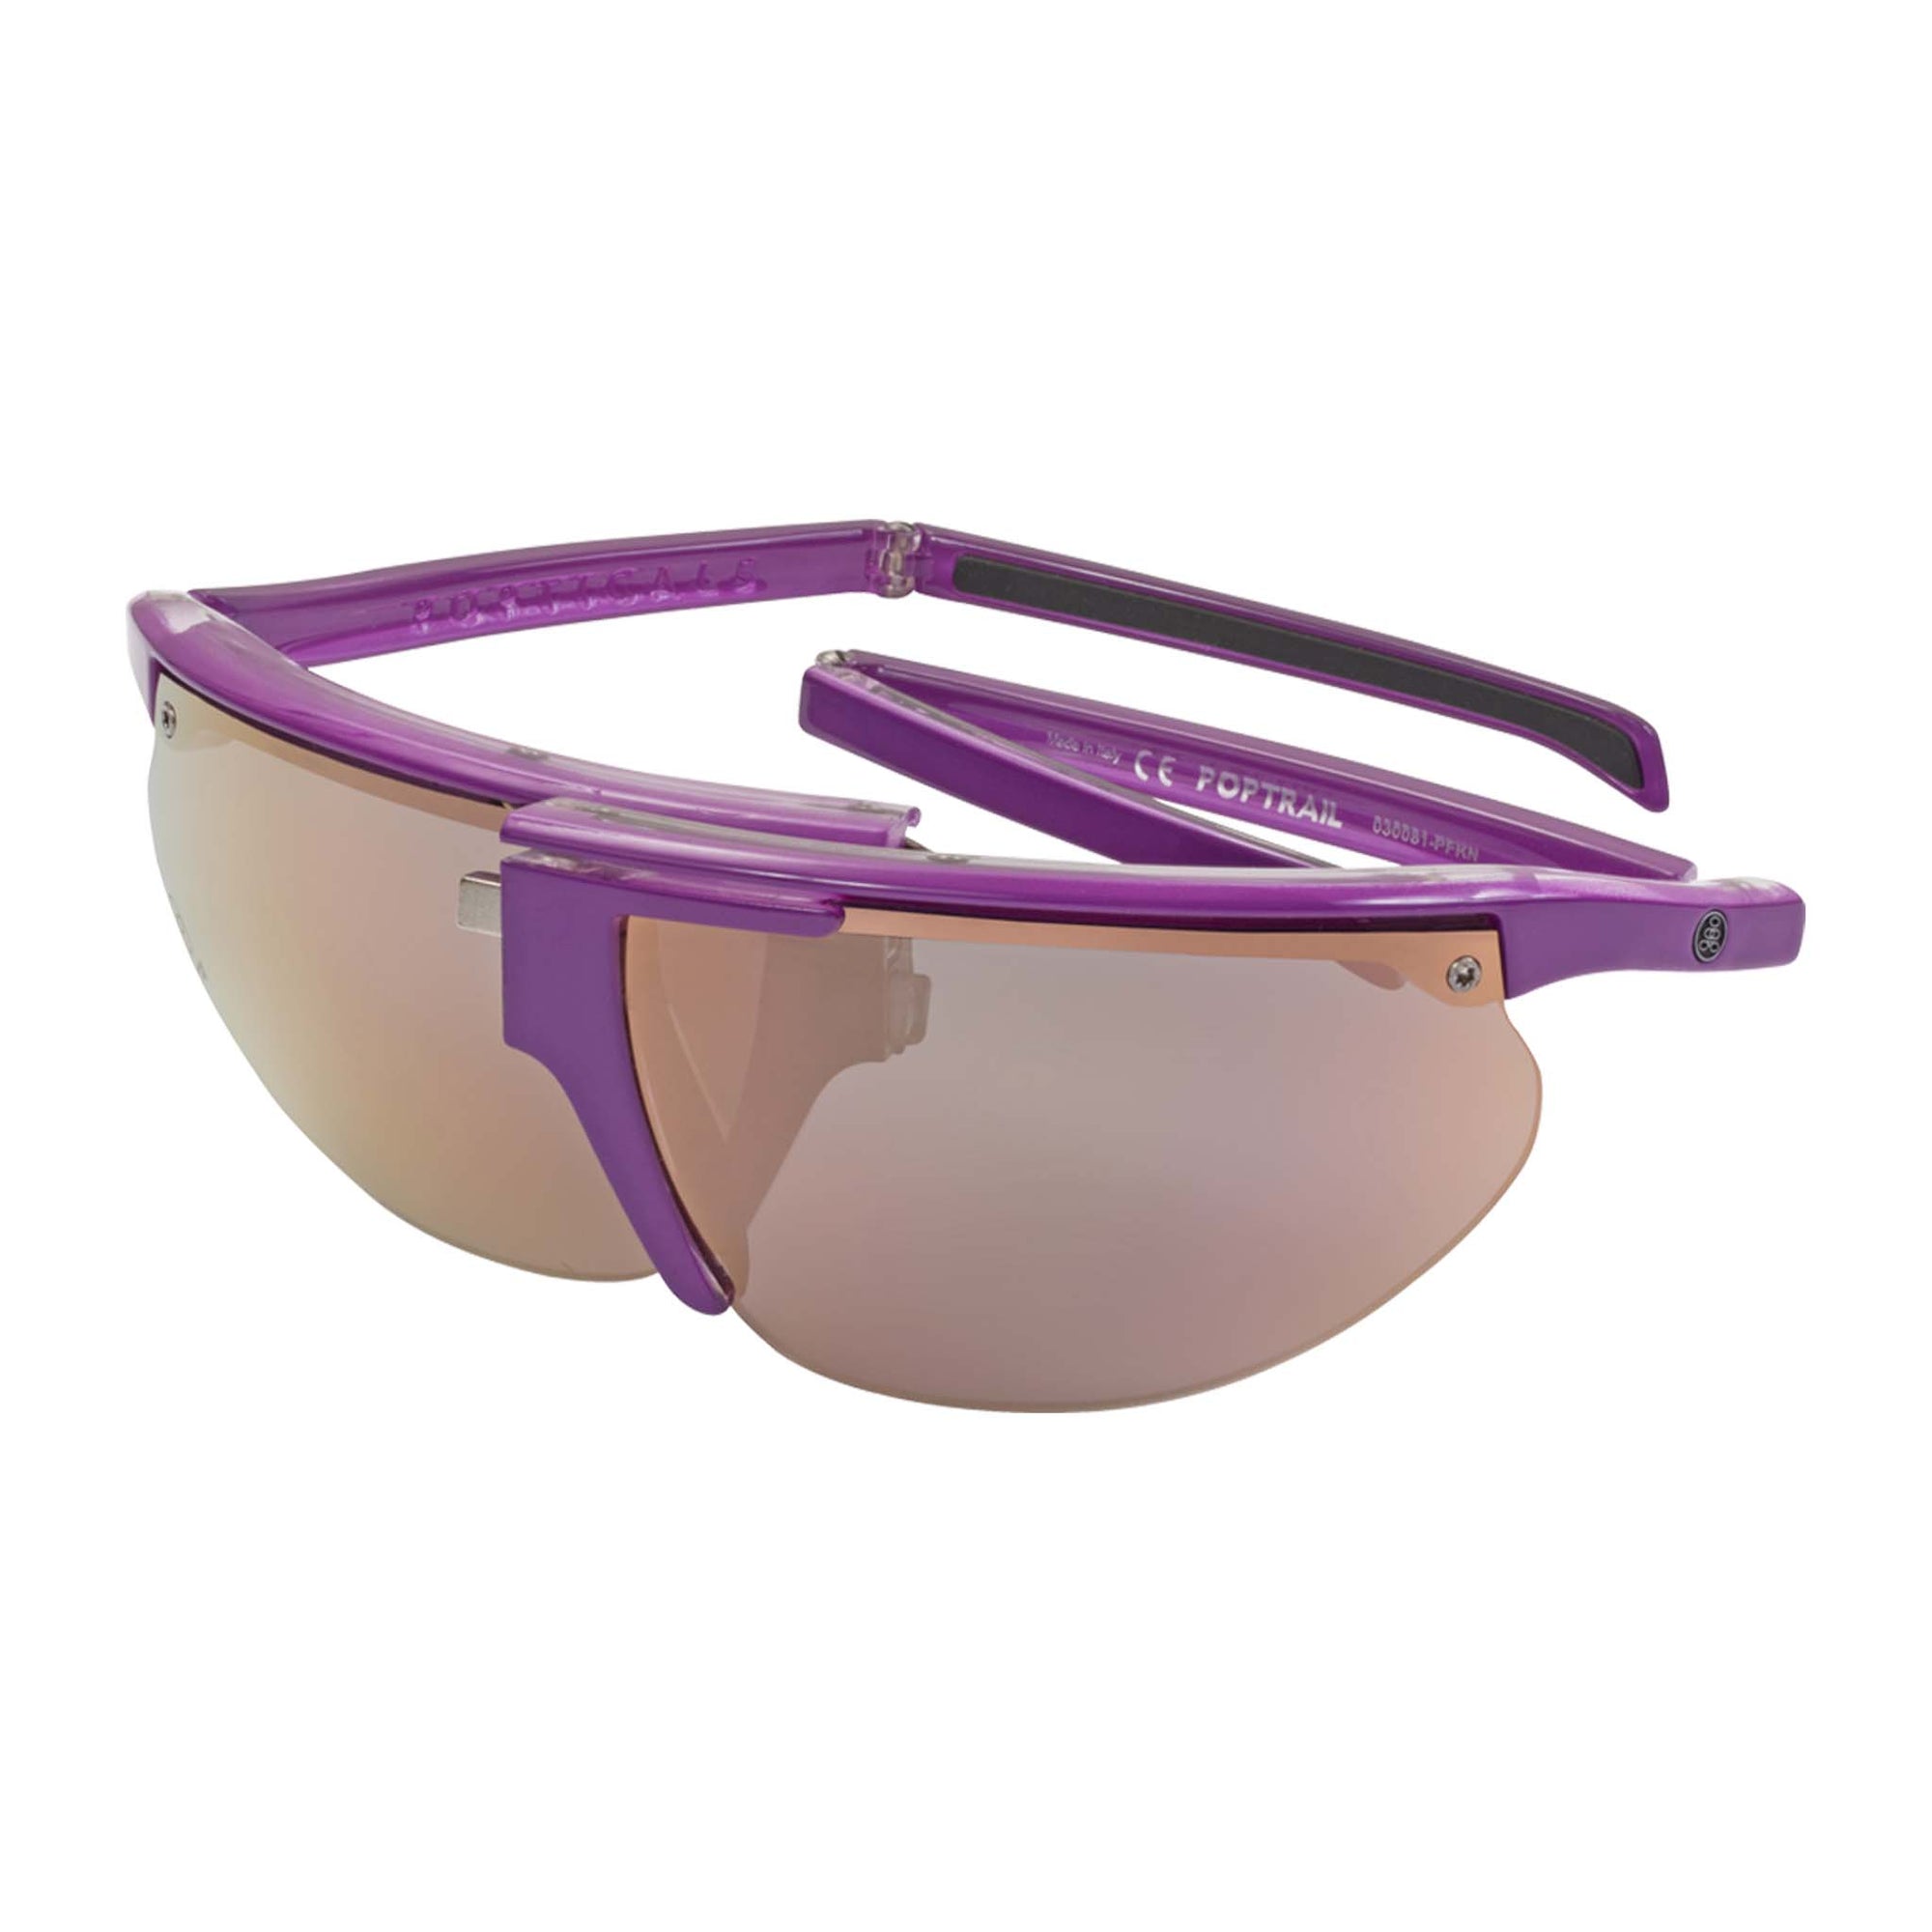 Popticals, Premium Compact Sunglasses, PopTrail, 030081-PFKN, Polarized Sunglasses, Gloss Lavender over Crystal Frame, Gray Lenses w/Pink Mirror Finish, Spider View